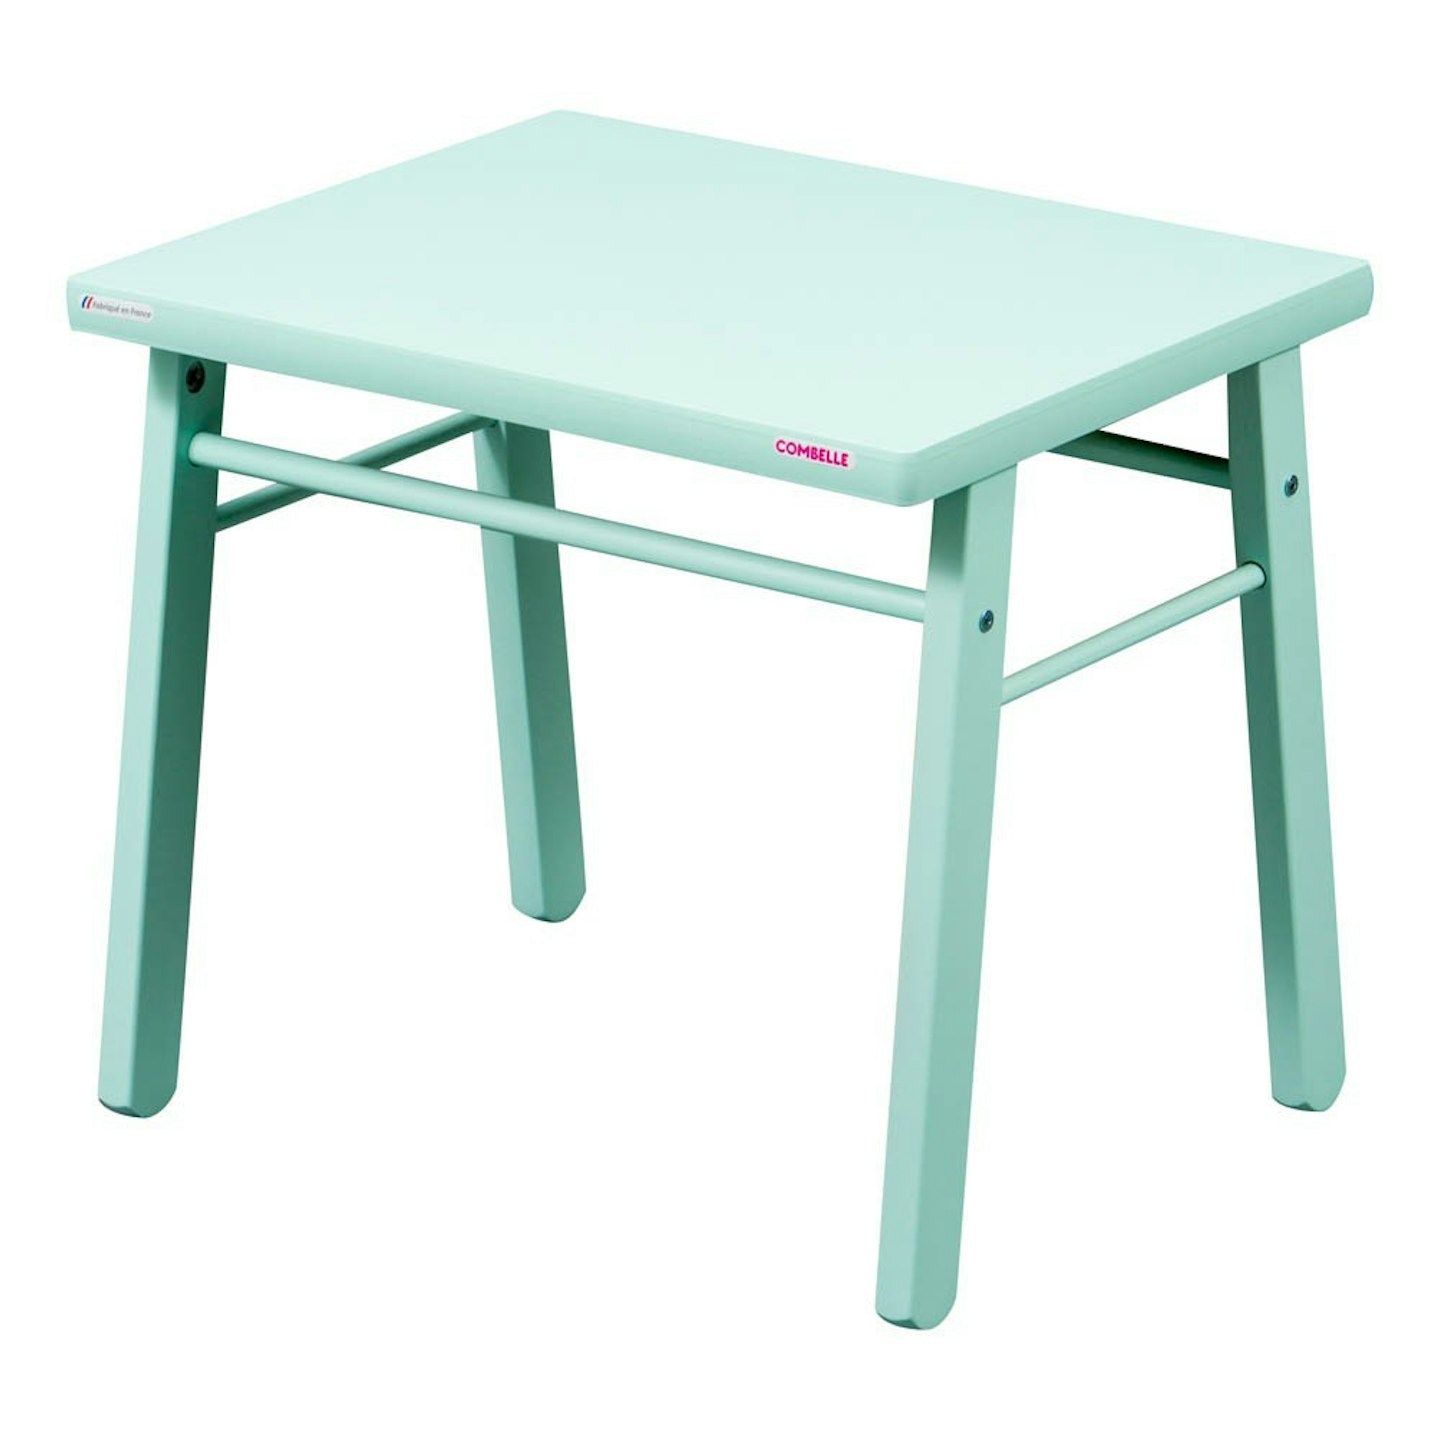 Combelle Sustainable Children's Table,  Smallable